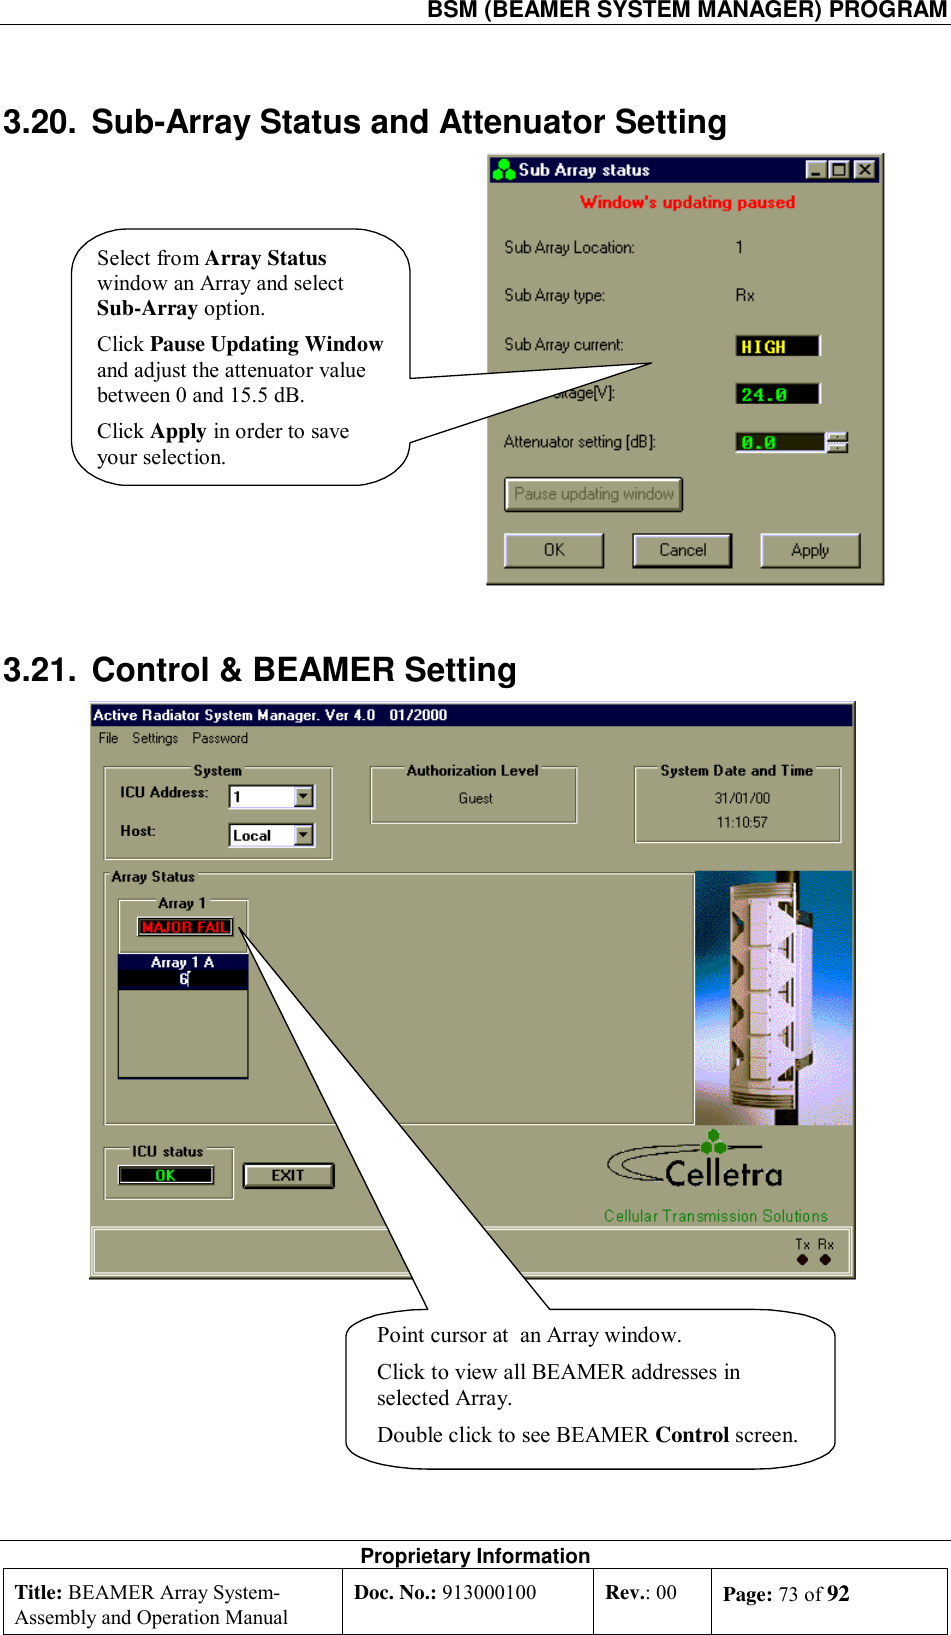   BSM (BEAMER SYSTEM MANAGER) PROGRAM Proprietary Information Title: BEAMER Array System- Assembly and Operation Manual Doc. No.: 913000100  Rev.: 00  Page: 73 of 92  3.20.  Sub-Array Status and Attenuator Setting  Select from Array Statuswindow an Array and selectSub-Array option.Click Pause Updating Windowand adjust the attenuator valuebetween 0 and 15.5 dB.Click Apply in order to saveyour selection. 3.21.  Control &amp; BEAMER Setting Point cursor at  an Array window.Click to view all BEAMER addresses inselected Array.Double click to see BEAMER Control screen. 